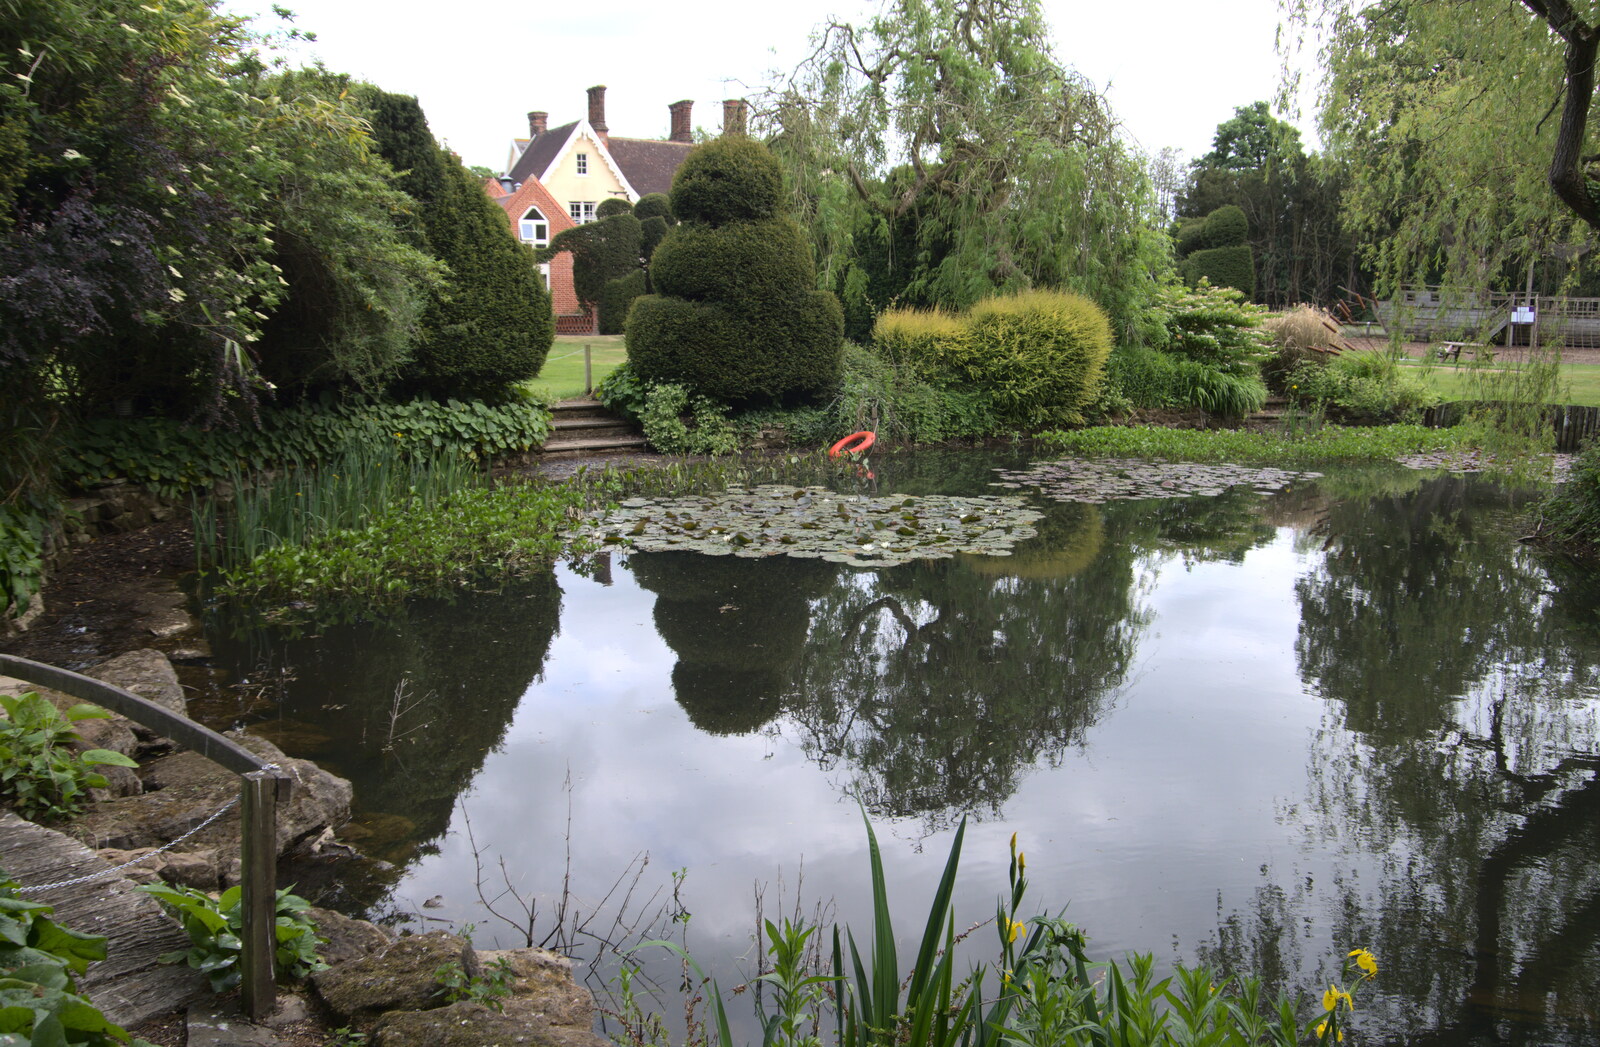 The Oaksmere's pond from More Lockdown Fun, Diss and Eye, Norfolk and Suffolk - 30th May 2020